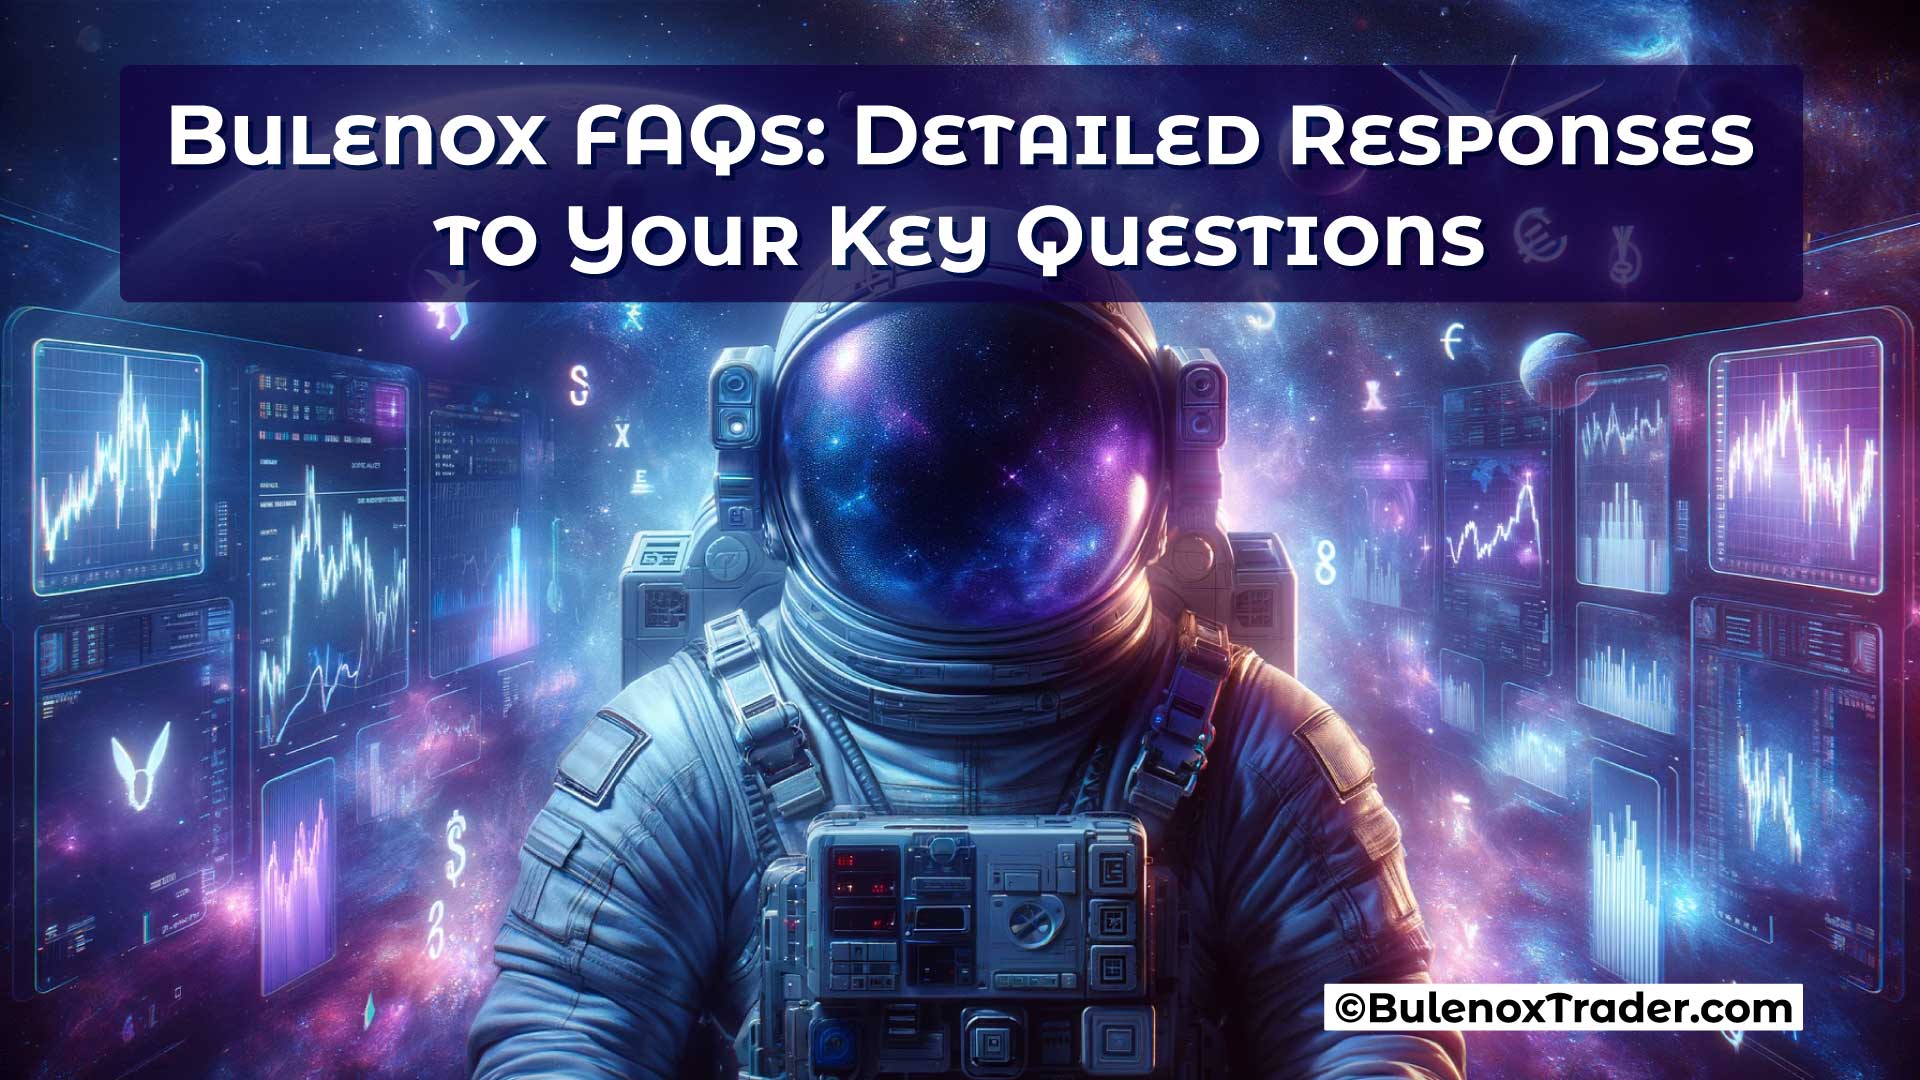 Bulenox FAQs: Detailed Responses to Your Key Questions